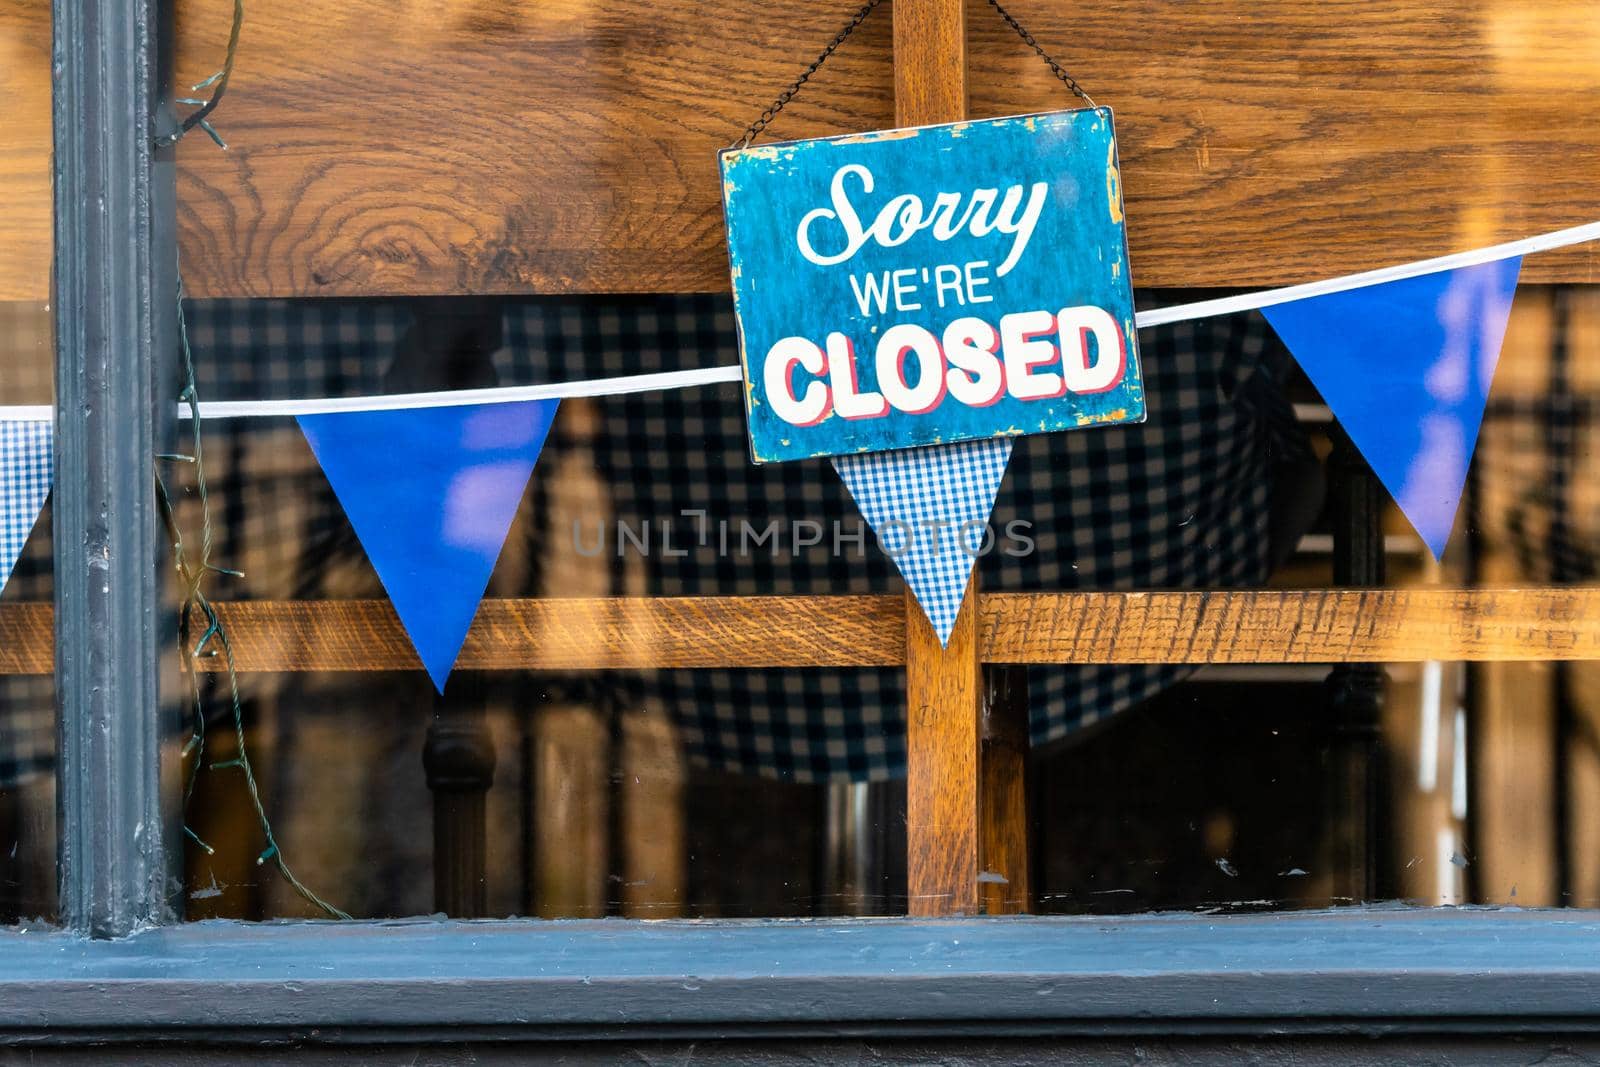 Sorry we are closed sign outside a restaurant during lockdown caused by covid-19 pandemic, Cambridge, UK